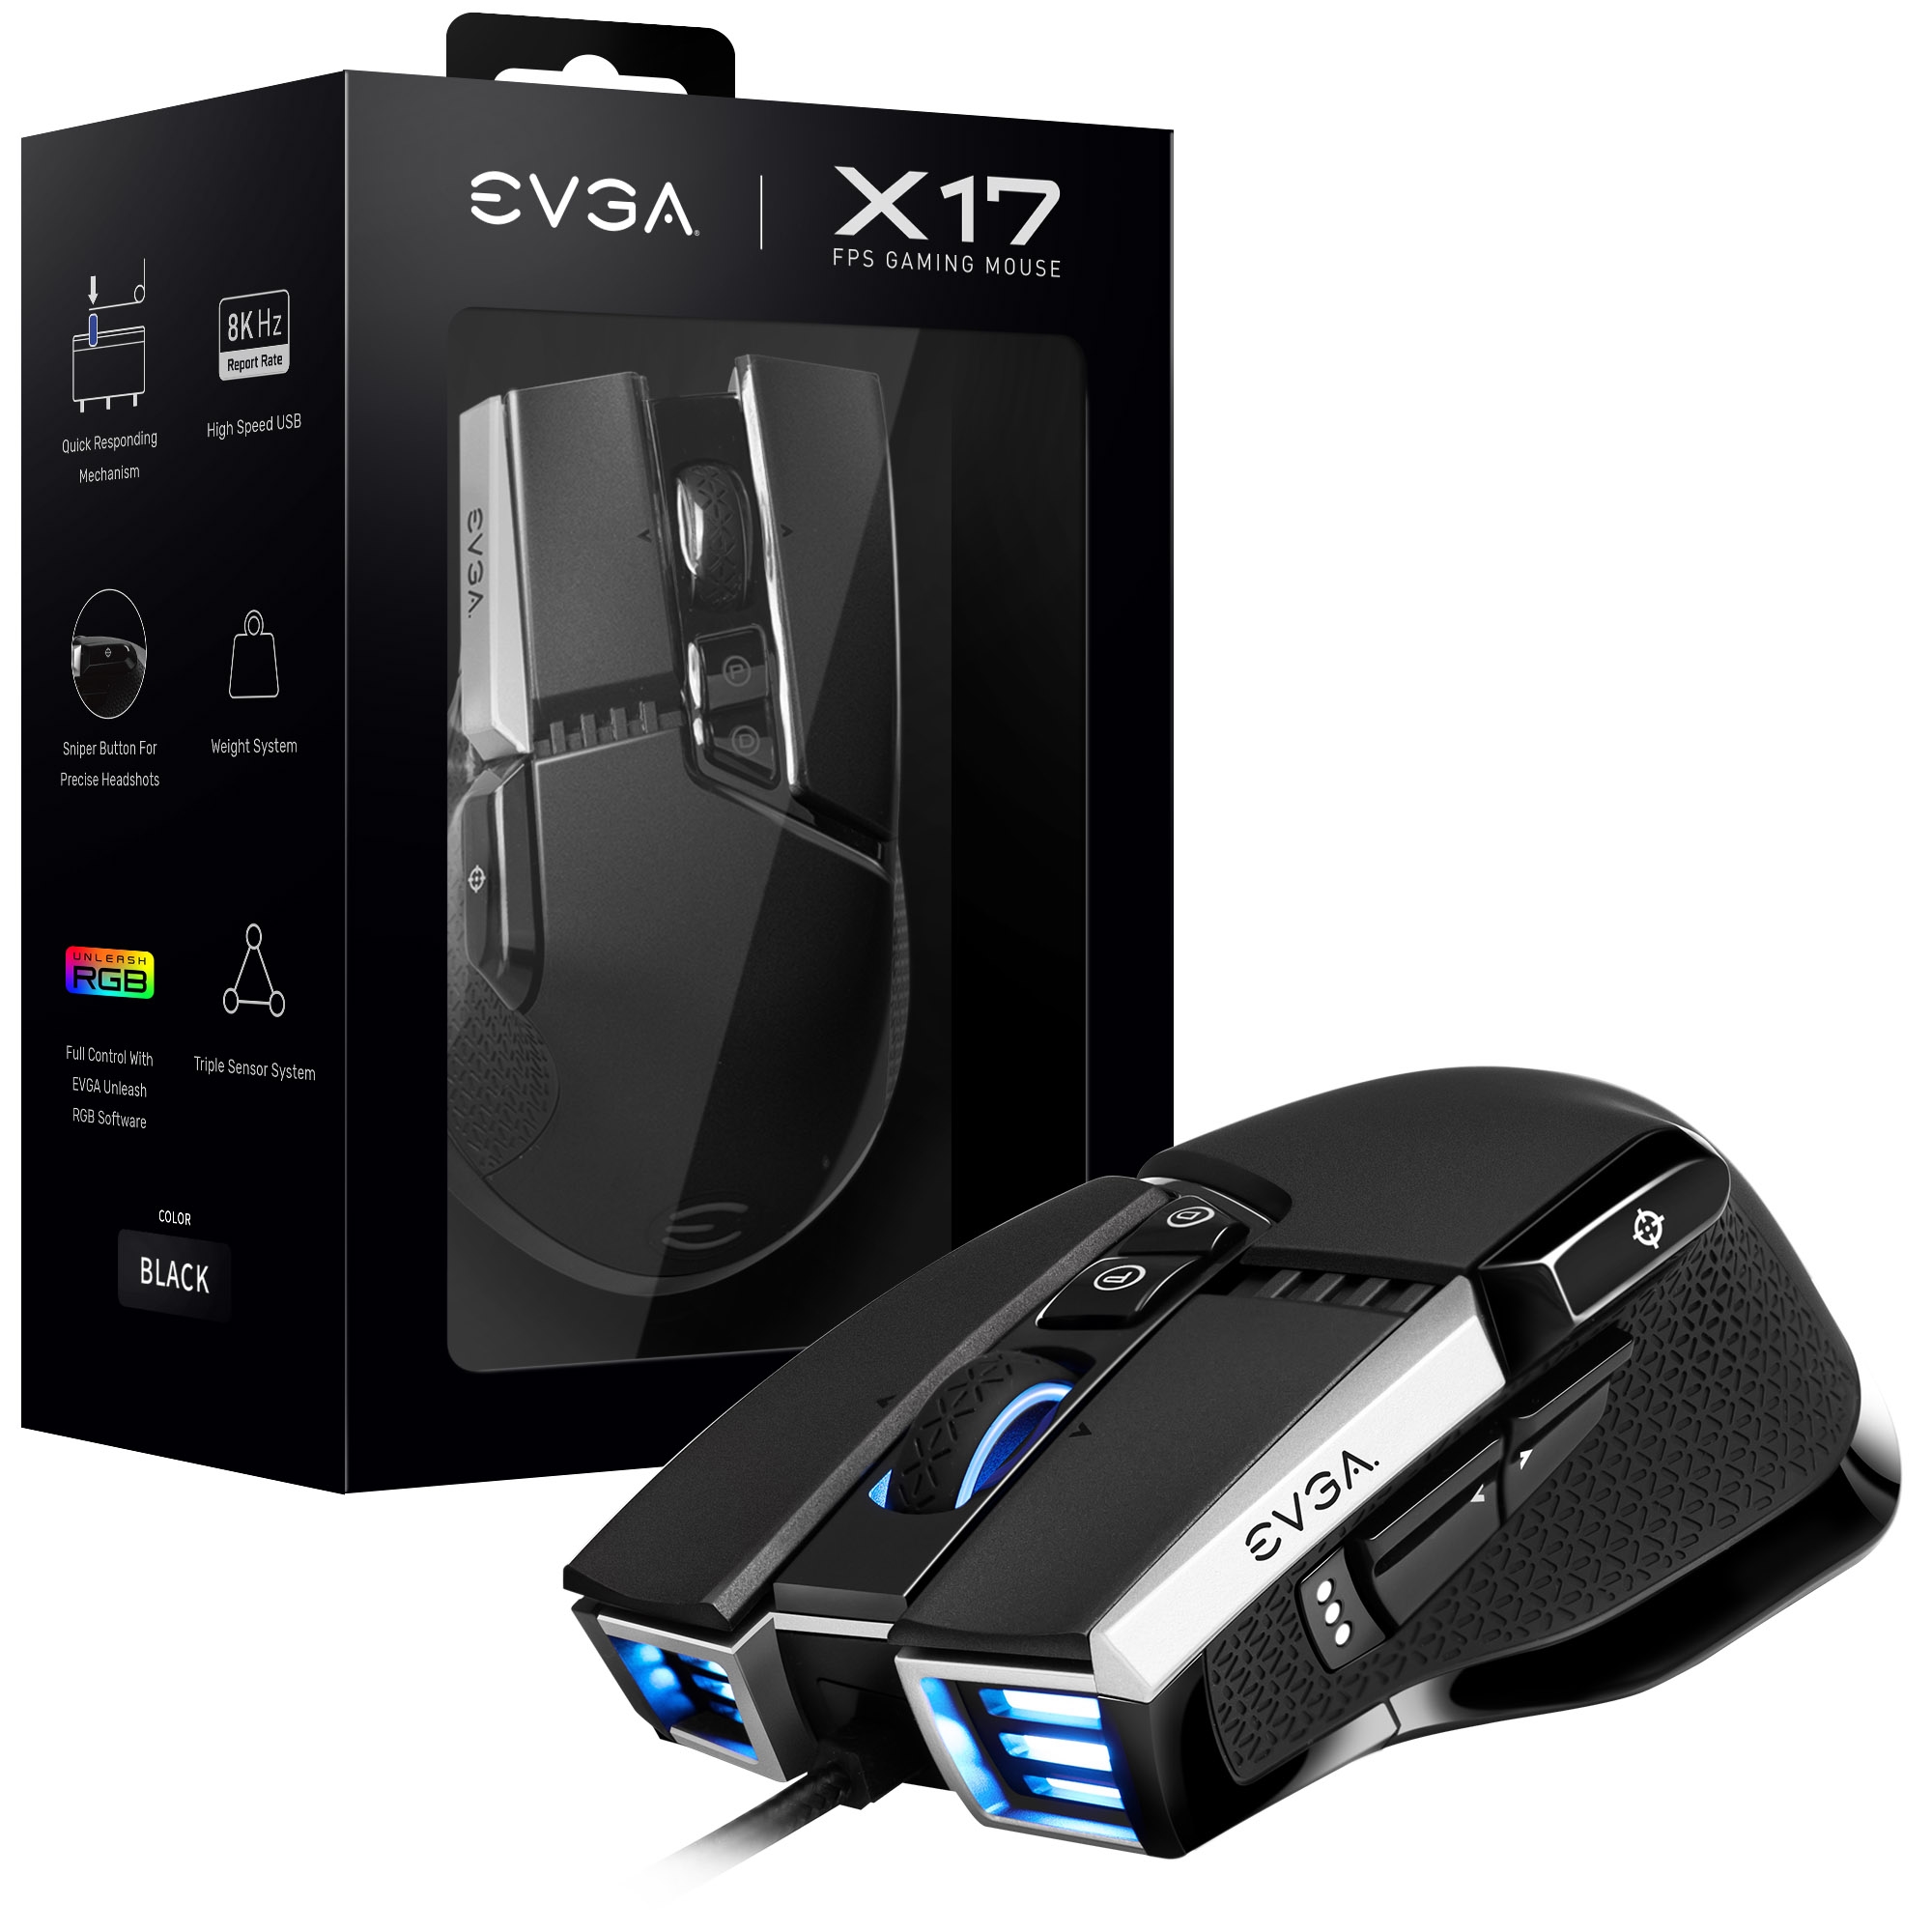 MOUSE GAMER EVGA X17 WIRE RETAIL BLACK